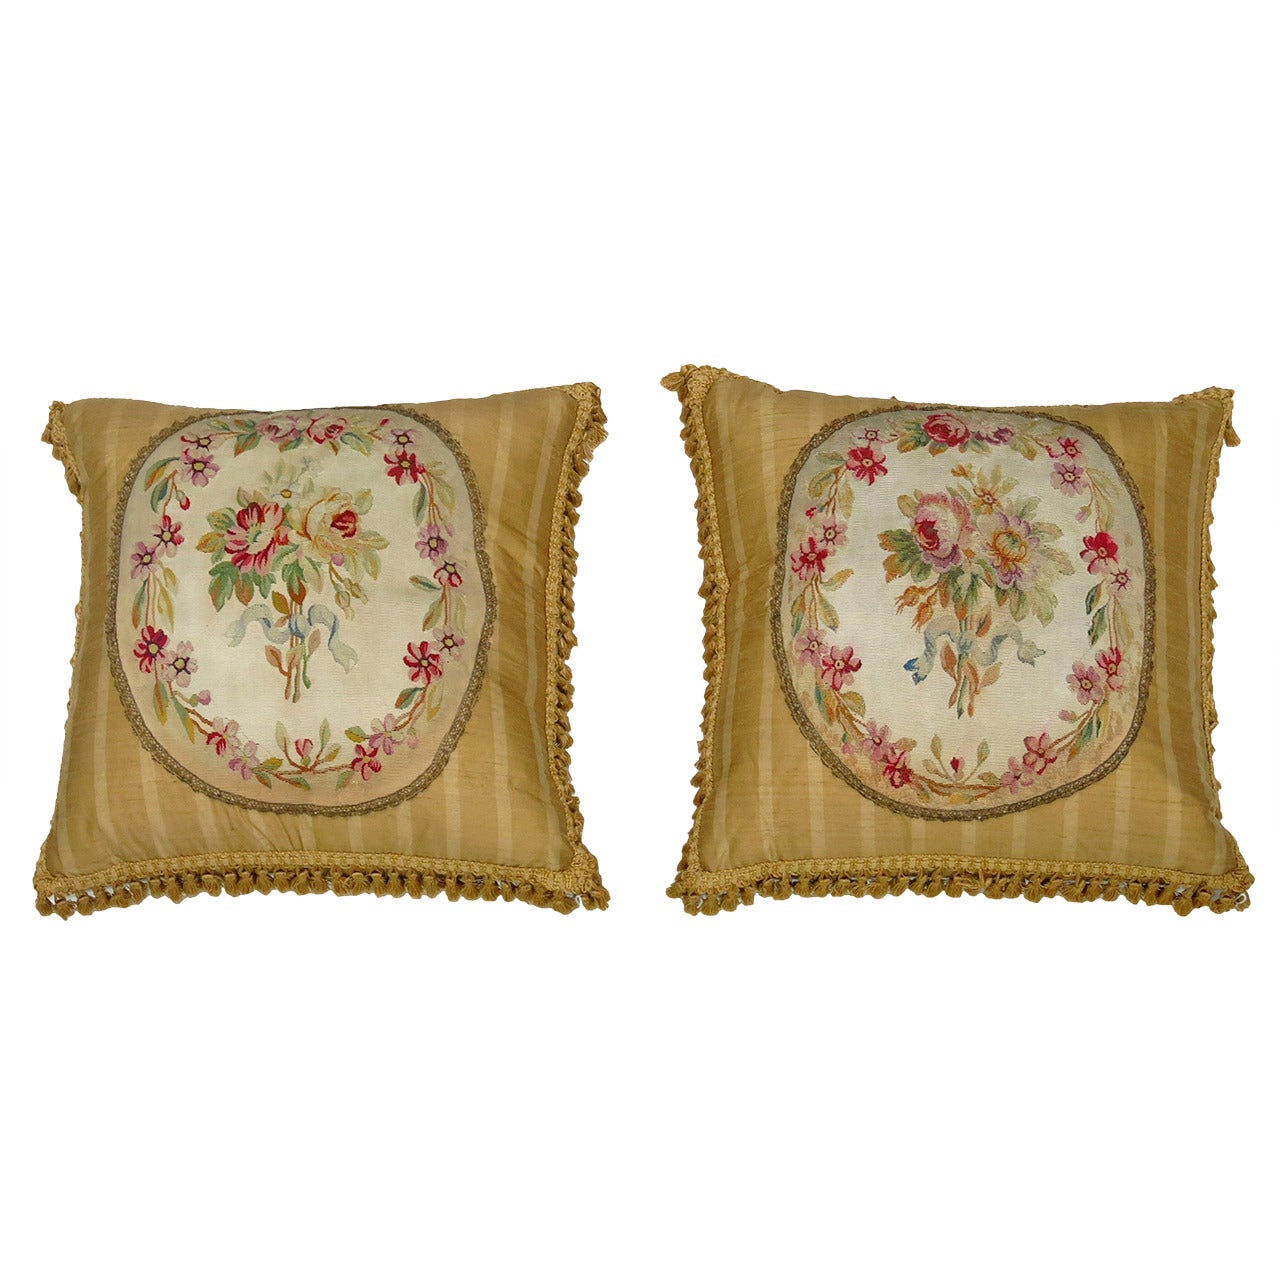 Pair of 18th Century Fortuny French Aubusson Pillows